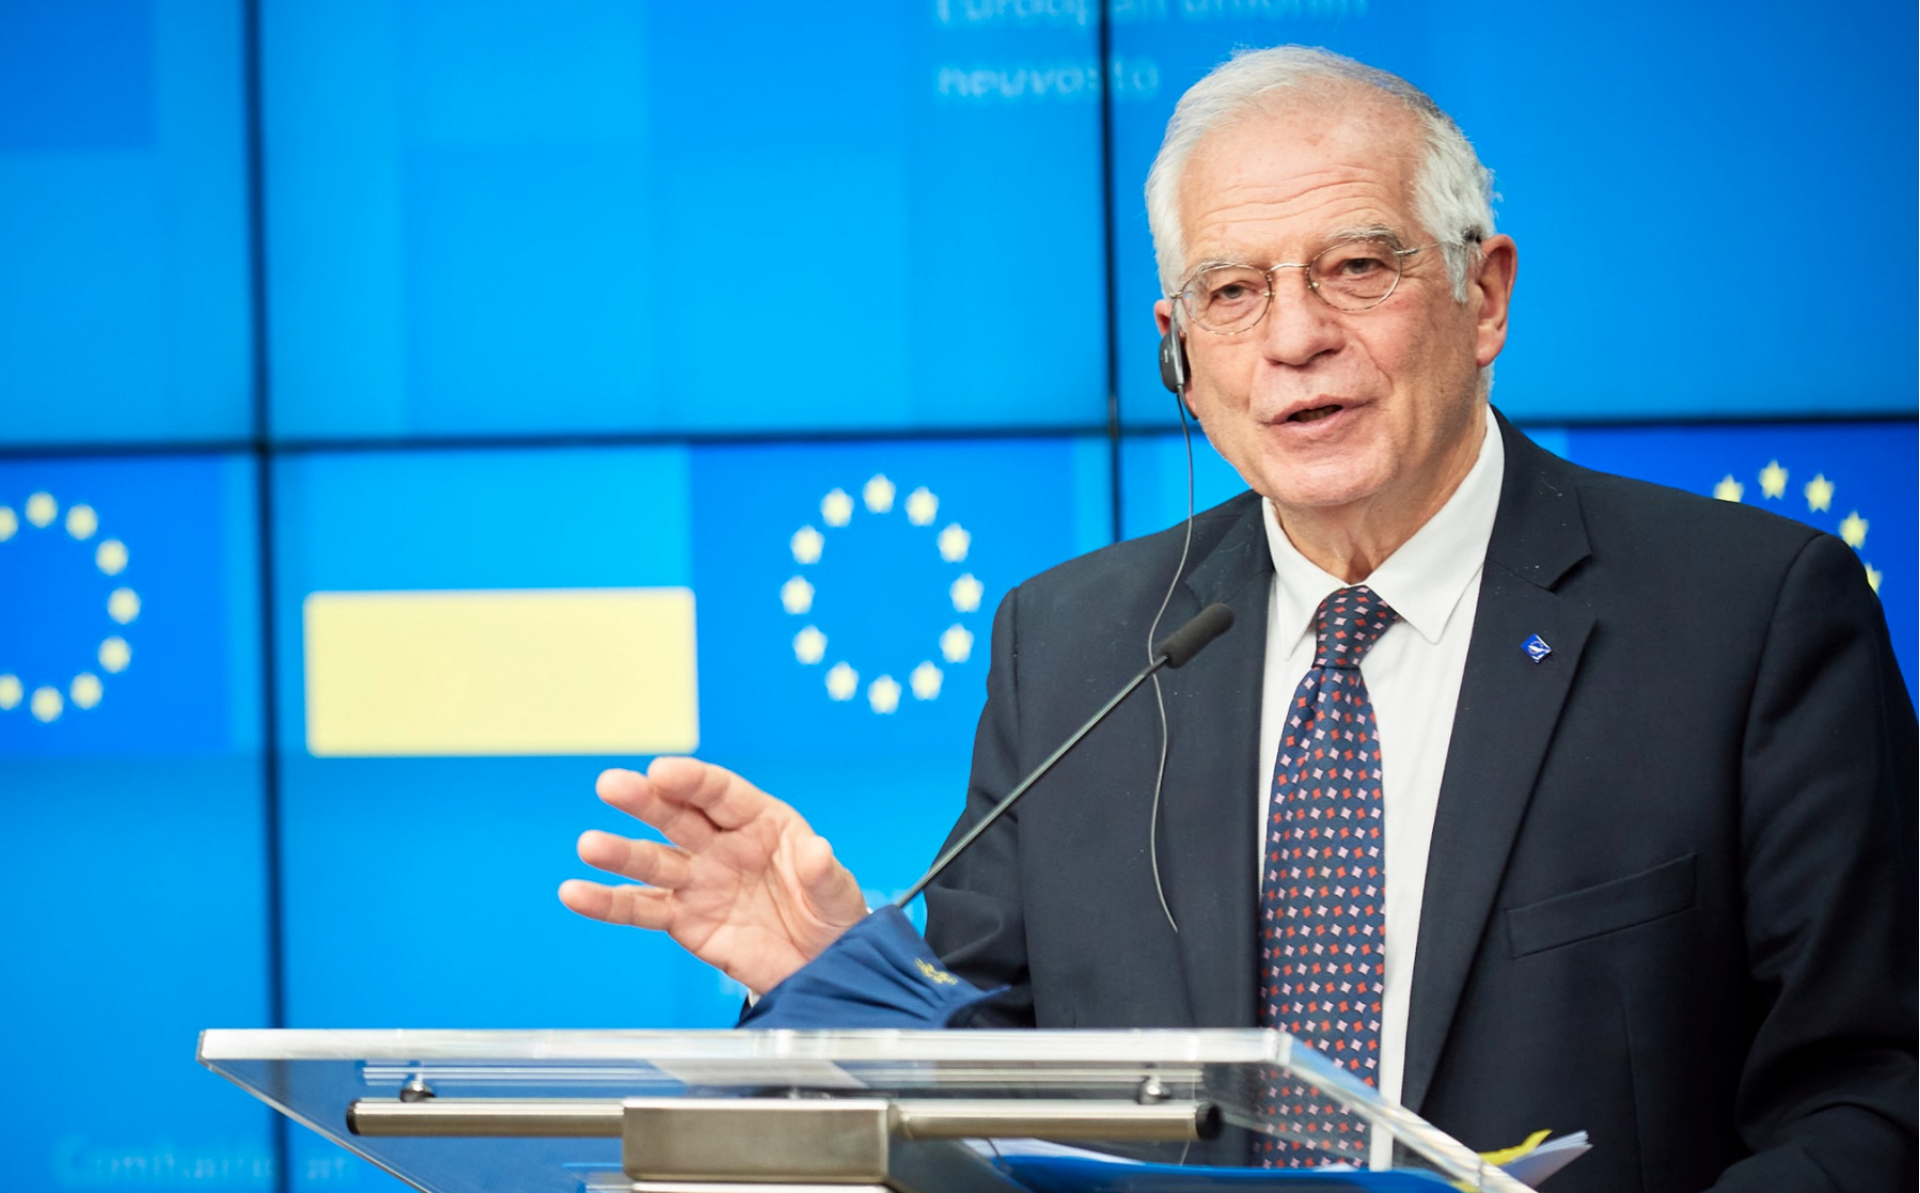 Borrell: ‘These are among the darkest hours of Europe since the Second World War’